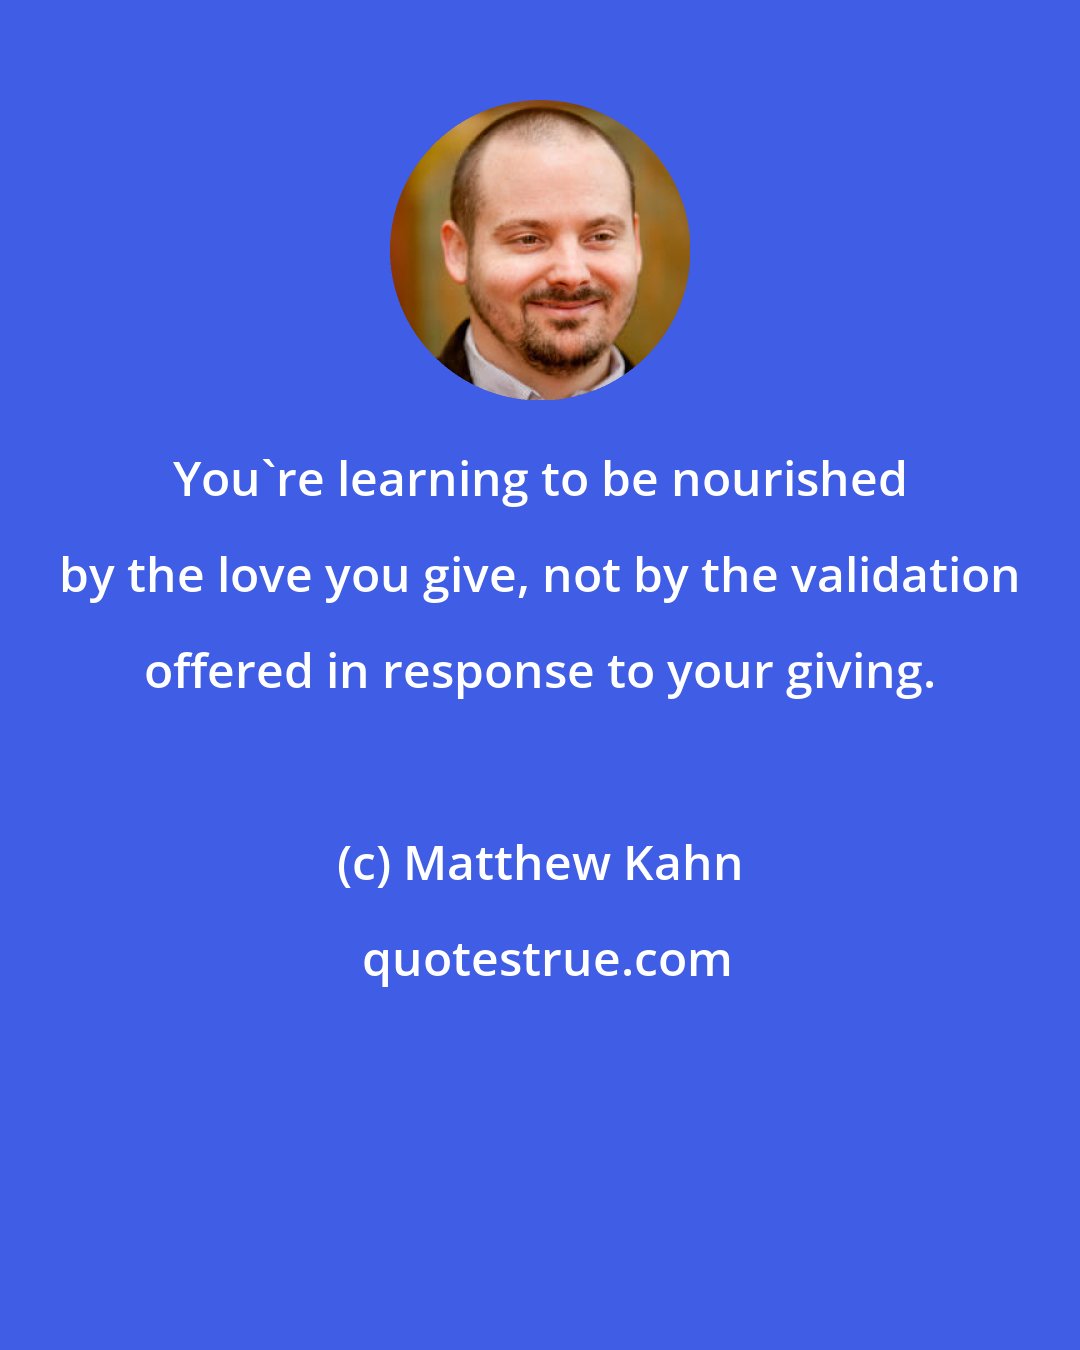 Matthew Kahn: You're learning to be nourished by the love you give, not by the validation offered in response to your giving.